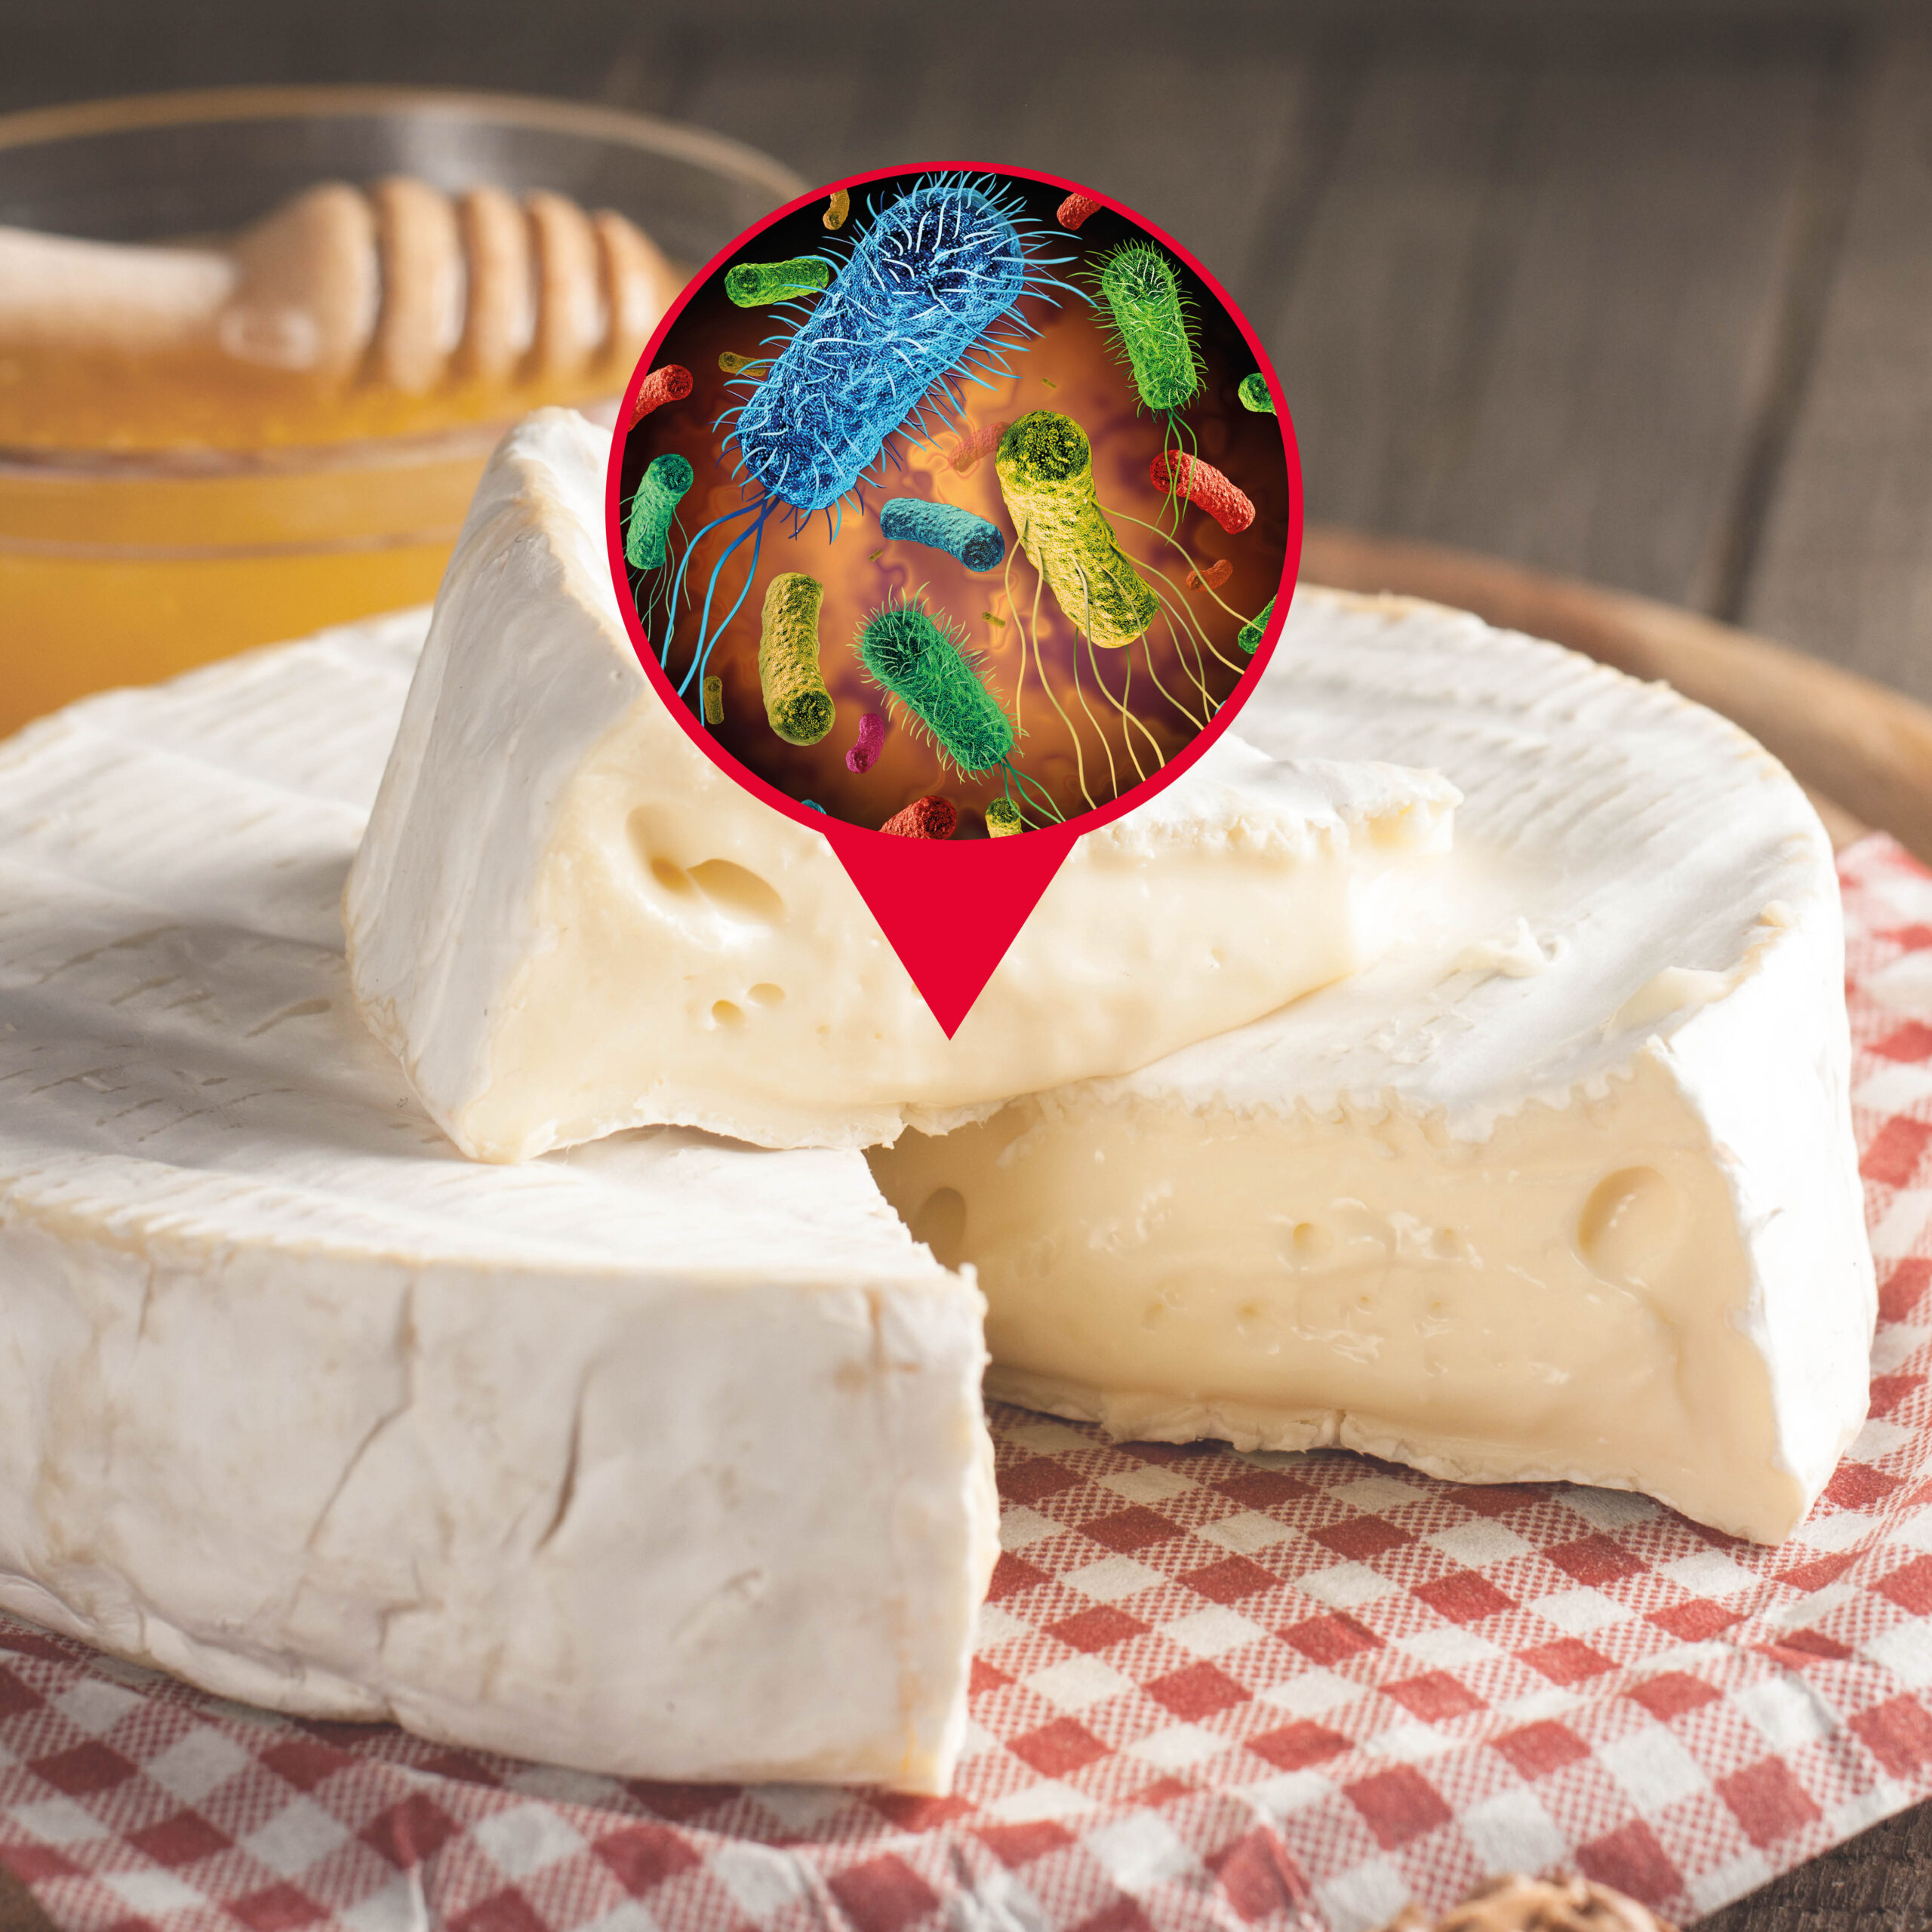 New bioprotective solution to control Listeria monocytogenes in cheese